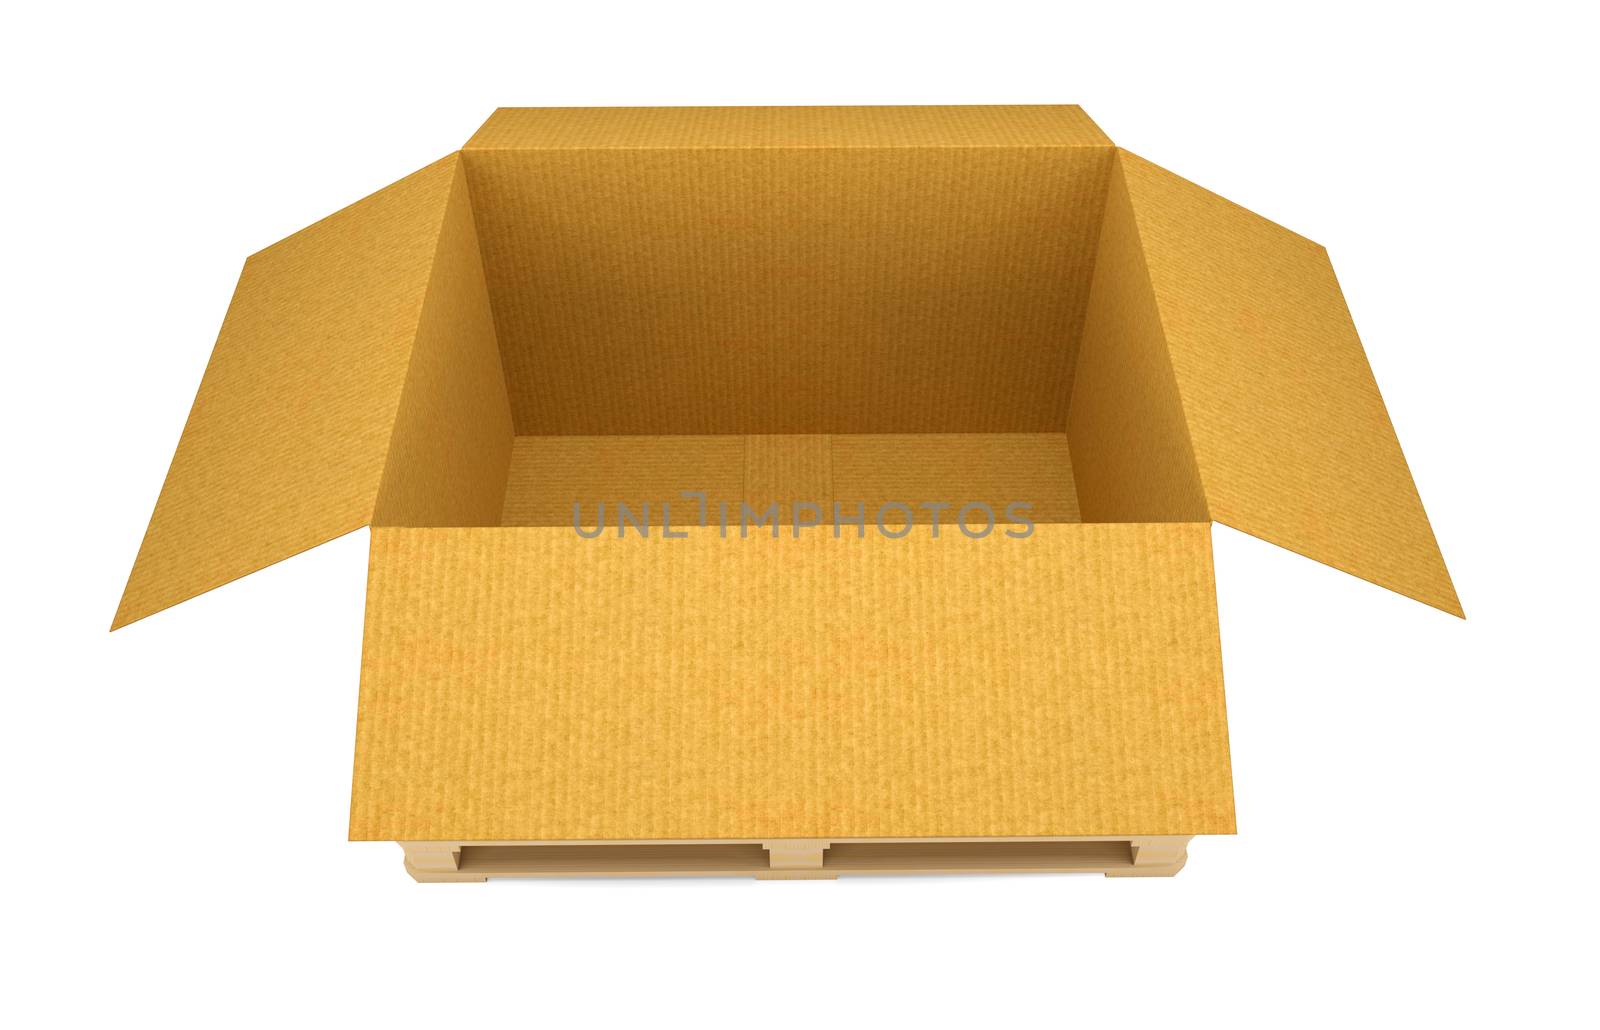 Opened cardboard box on wooden pallete by cherezoff